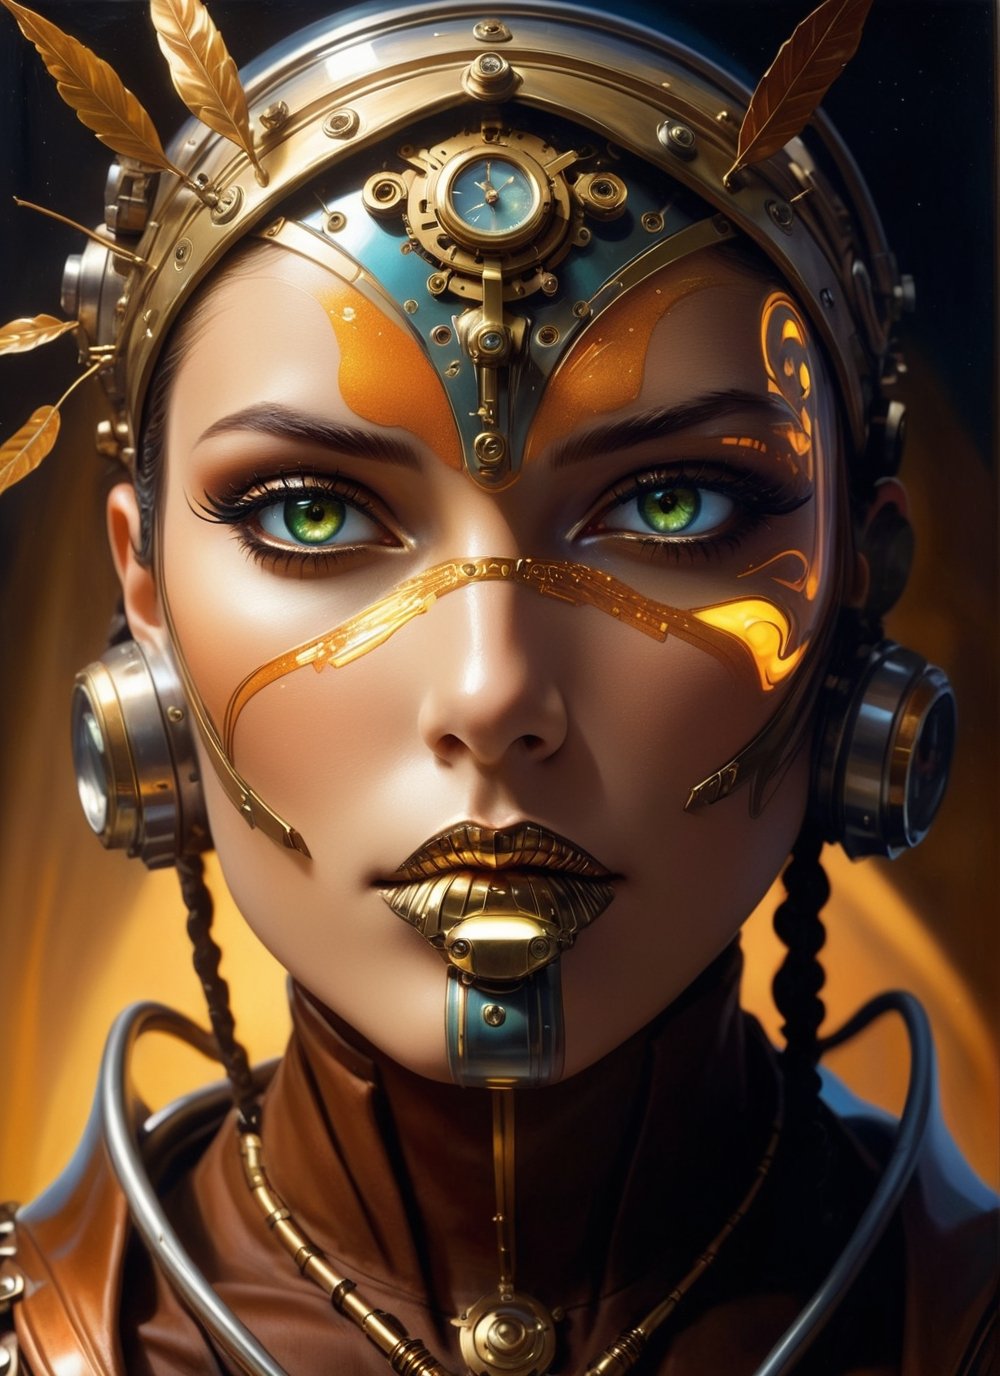 art by Masamune Shirow, art by J.C. Leyendecker, a masterpiece, stunning beauty, perfect face, full-body, hyper-realistic oil painting, vibrant colors, Body horror, steampunk spacesuit, full face translucent visor, in the style of futuristic space glamour, Steam punk, tribal adornments, frank frazetta style pose, perfect makeup, boris vallejo style background, plain neon steampunk background ,biopunk style,cyberpunk style,art by sargent,Oil painting of Mona Lisa ,Leaf,Leonardo Style,fr4z3tt4 , ,futuristic alien,Low-key lighting Style